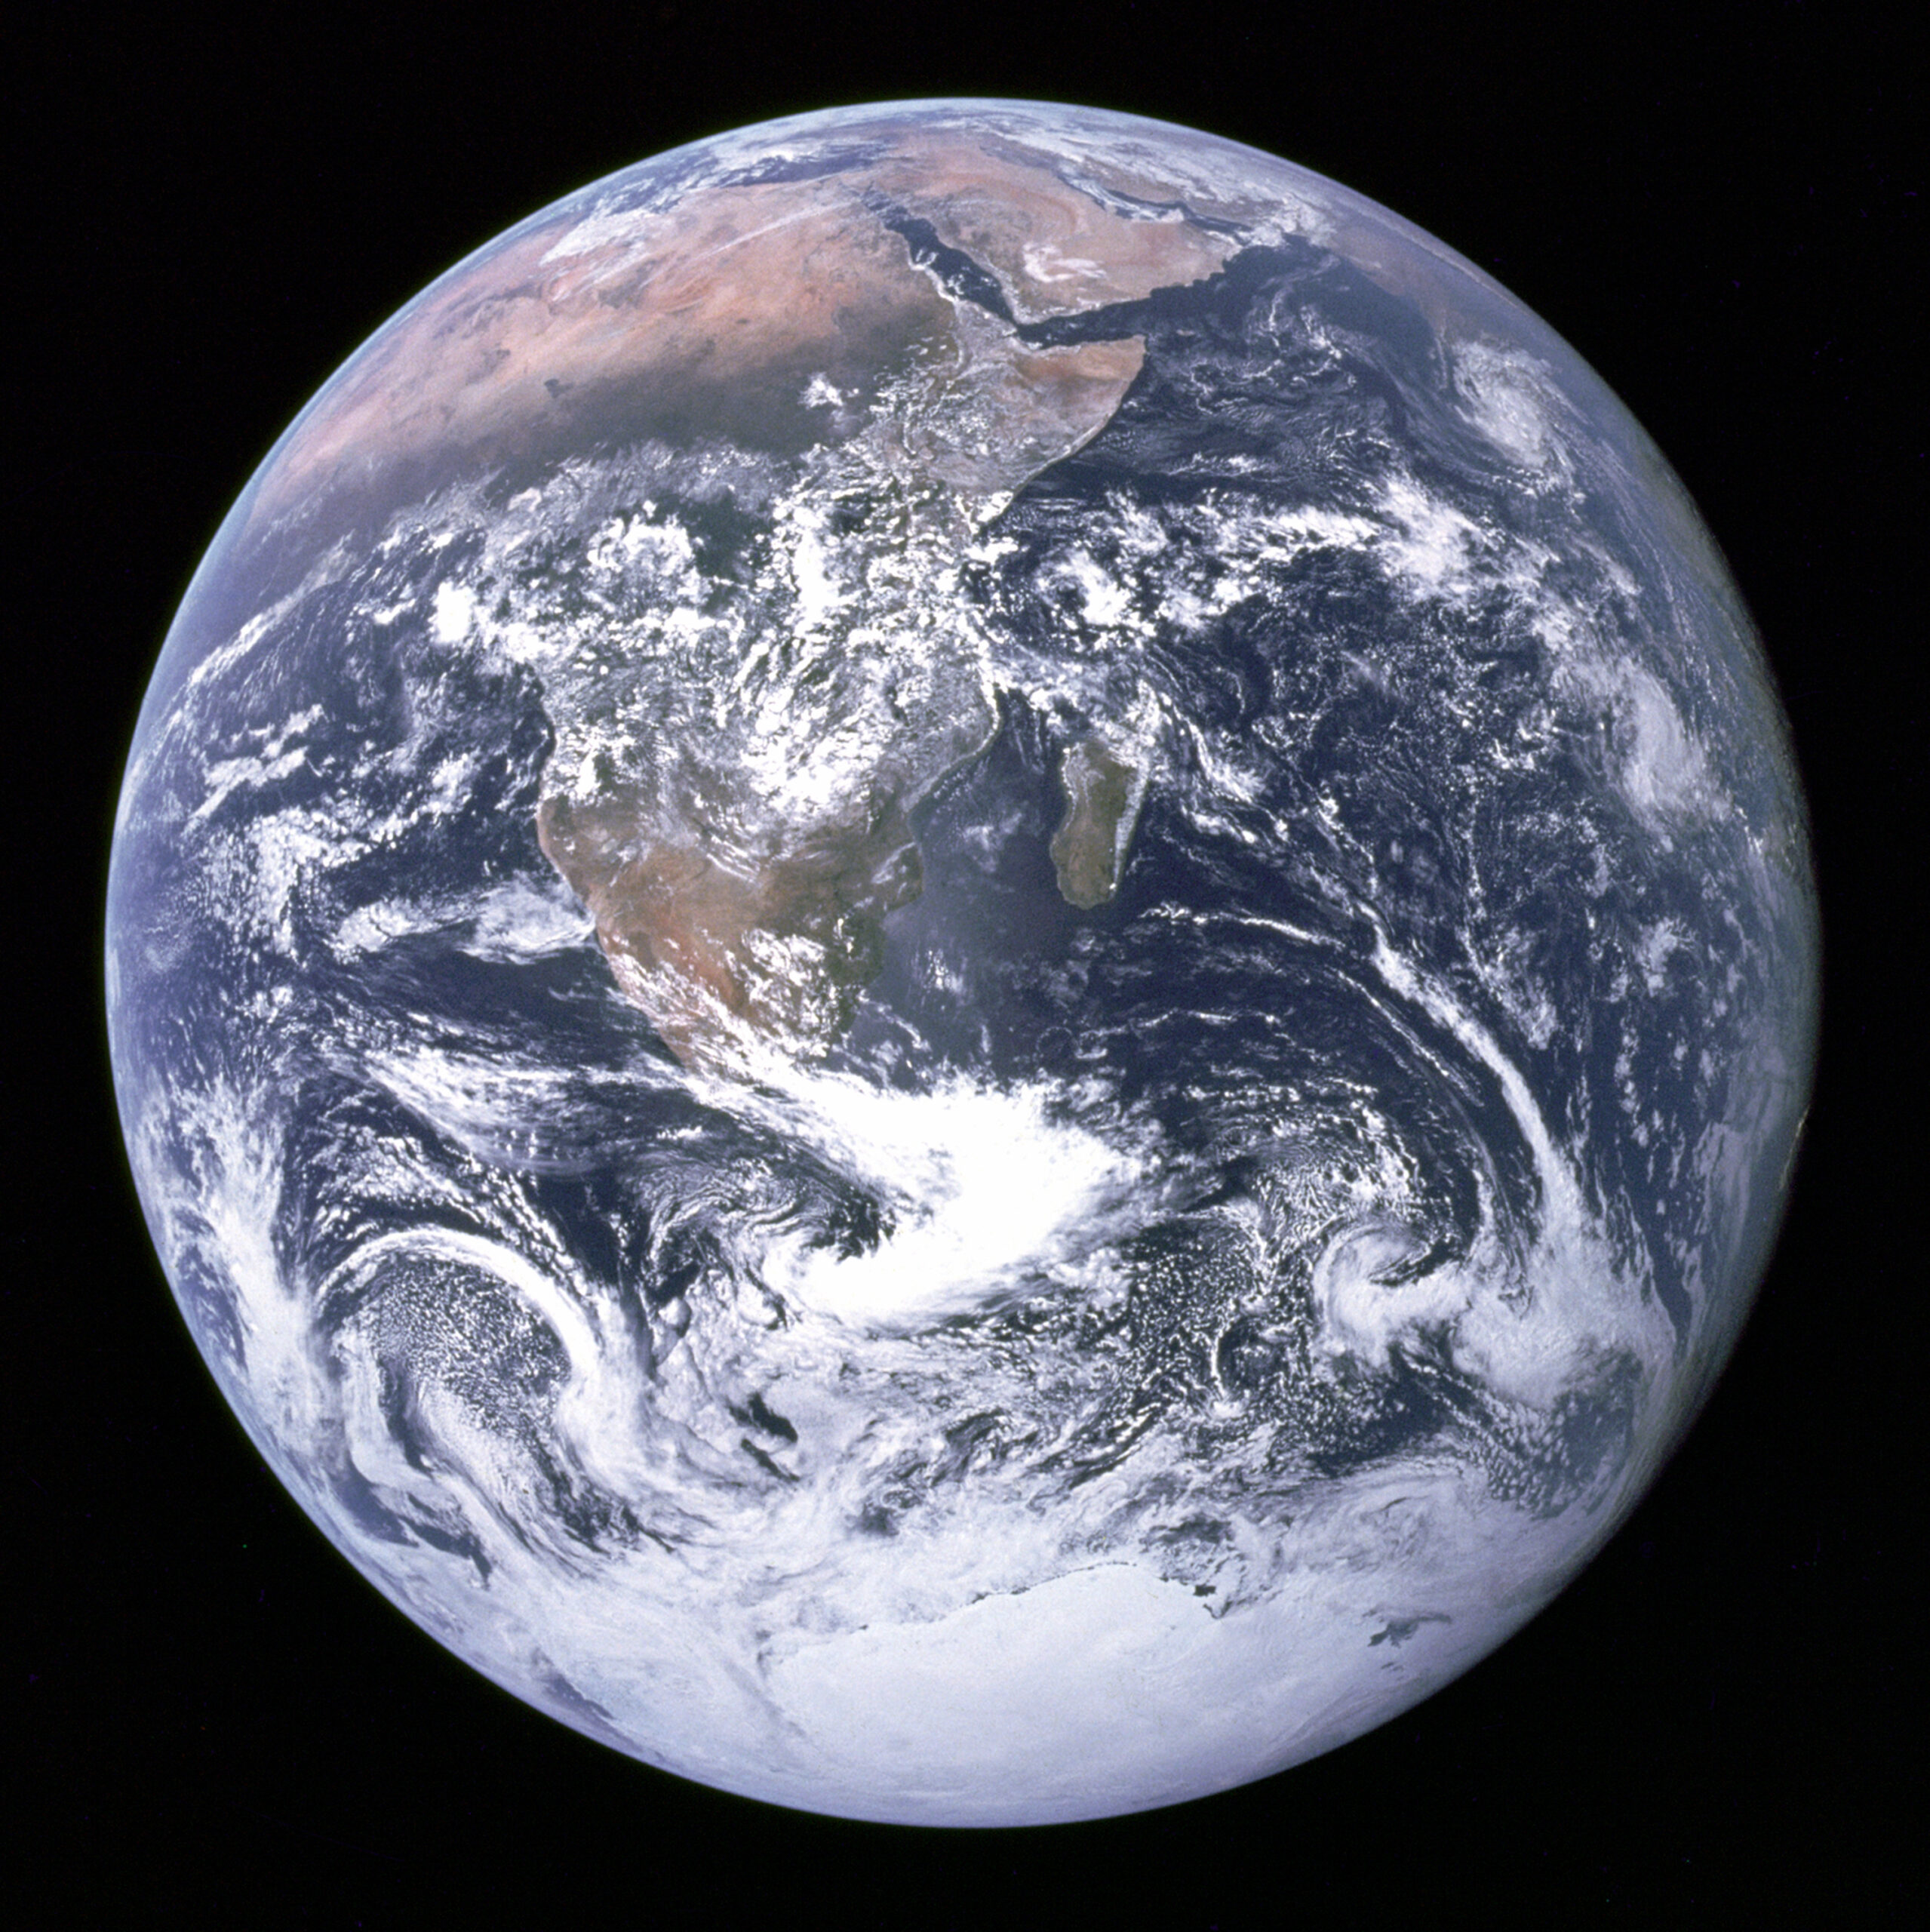 Blue Marble: The Earth!